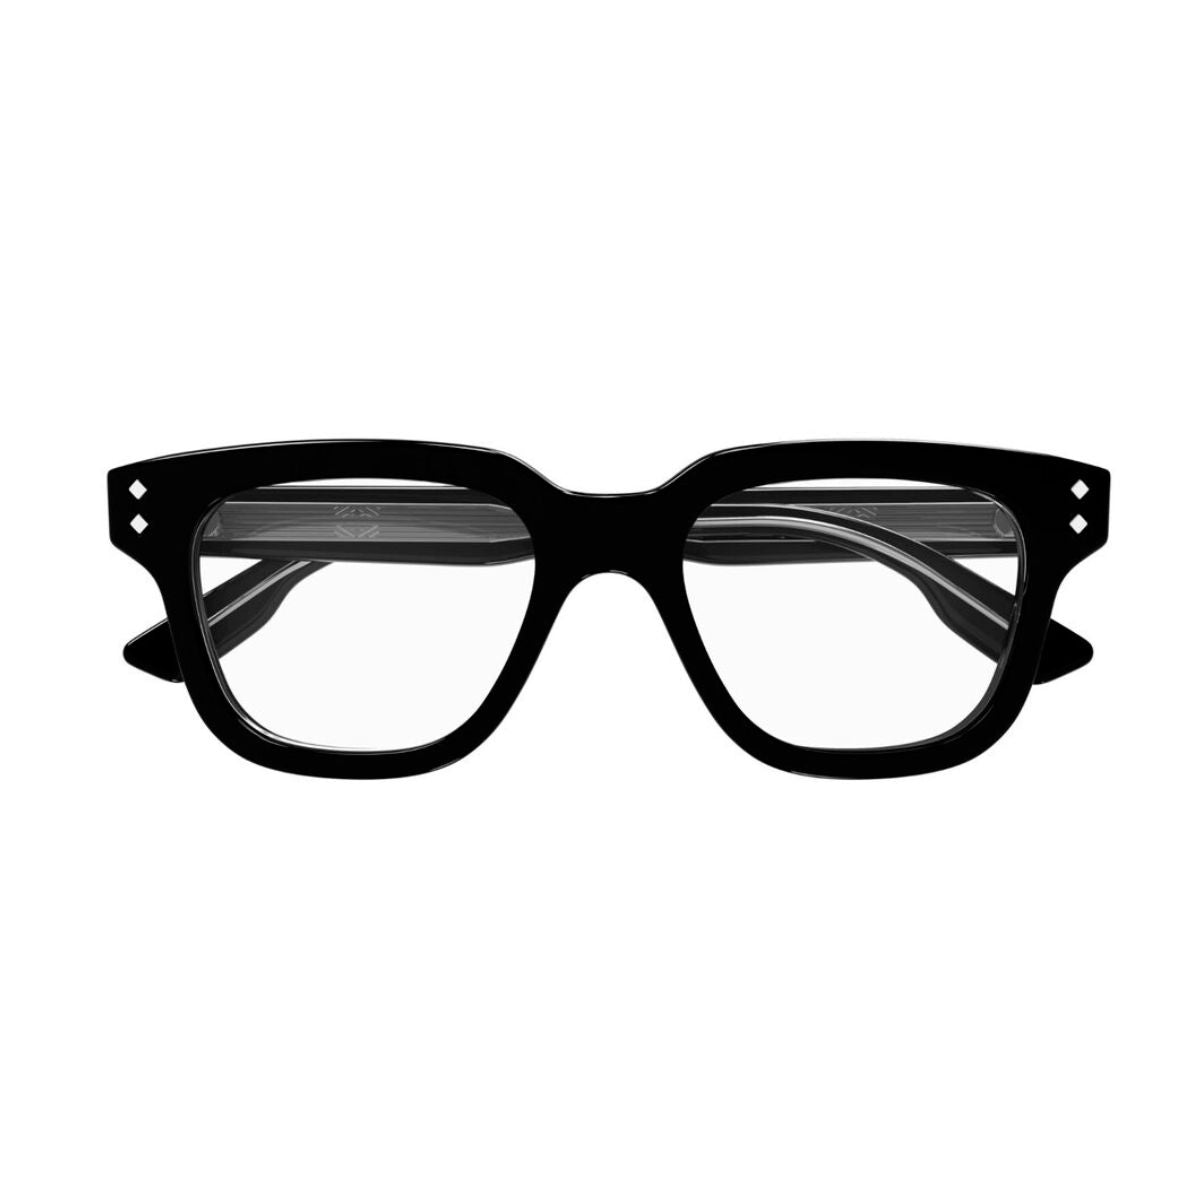 "buy Gucci 1219O 001 square eyeglasses frame for men and women at optorium"